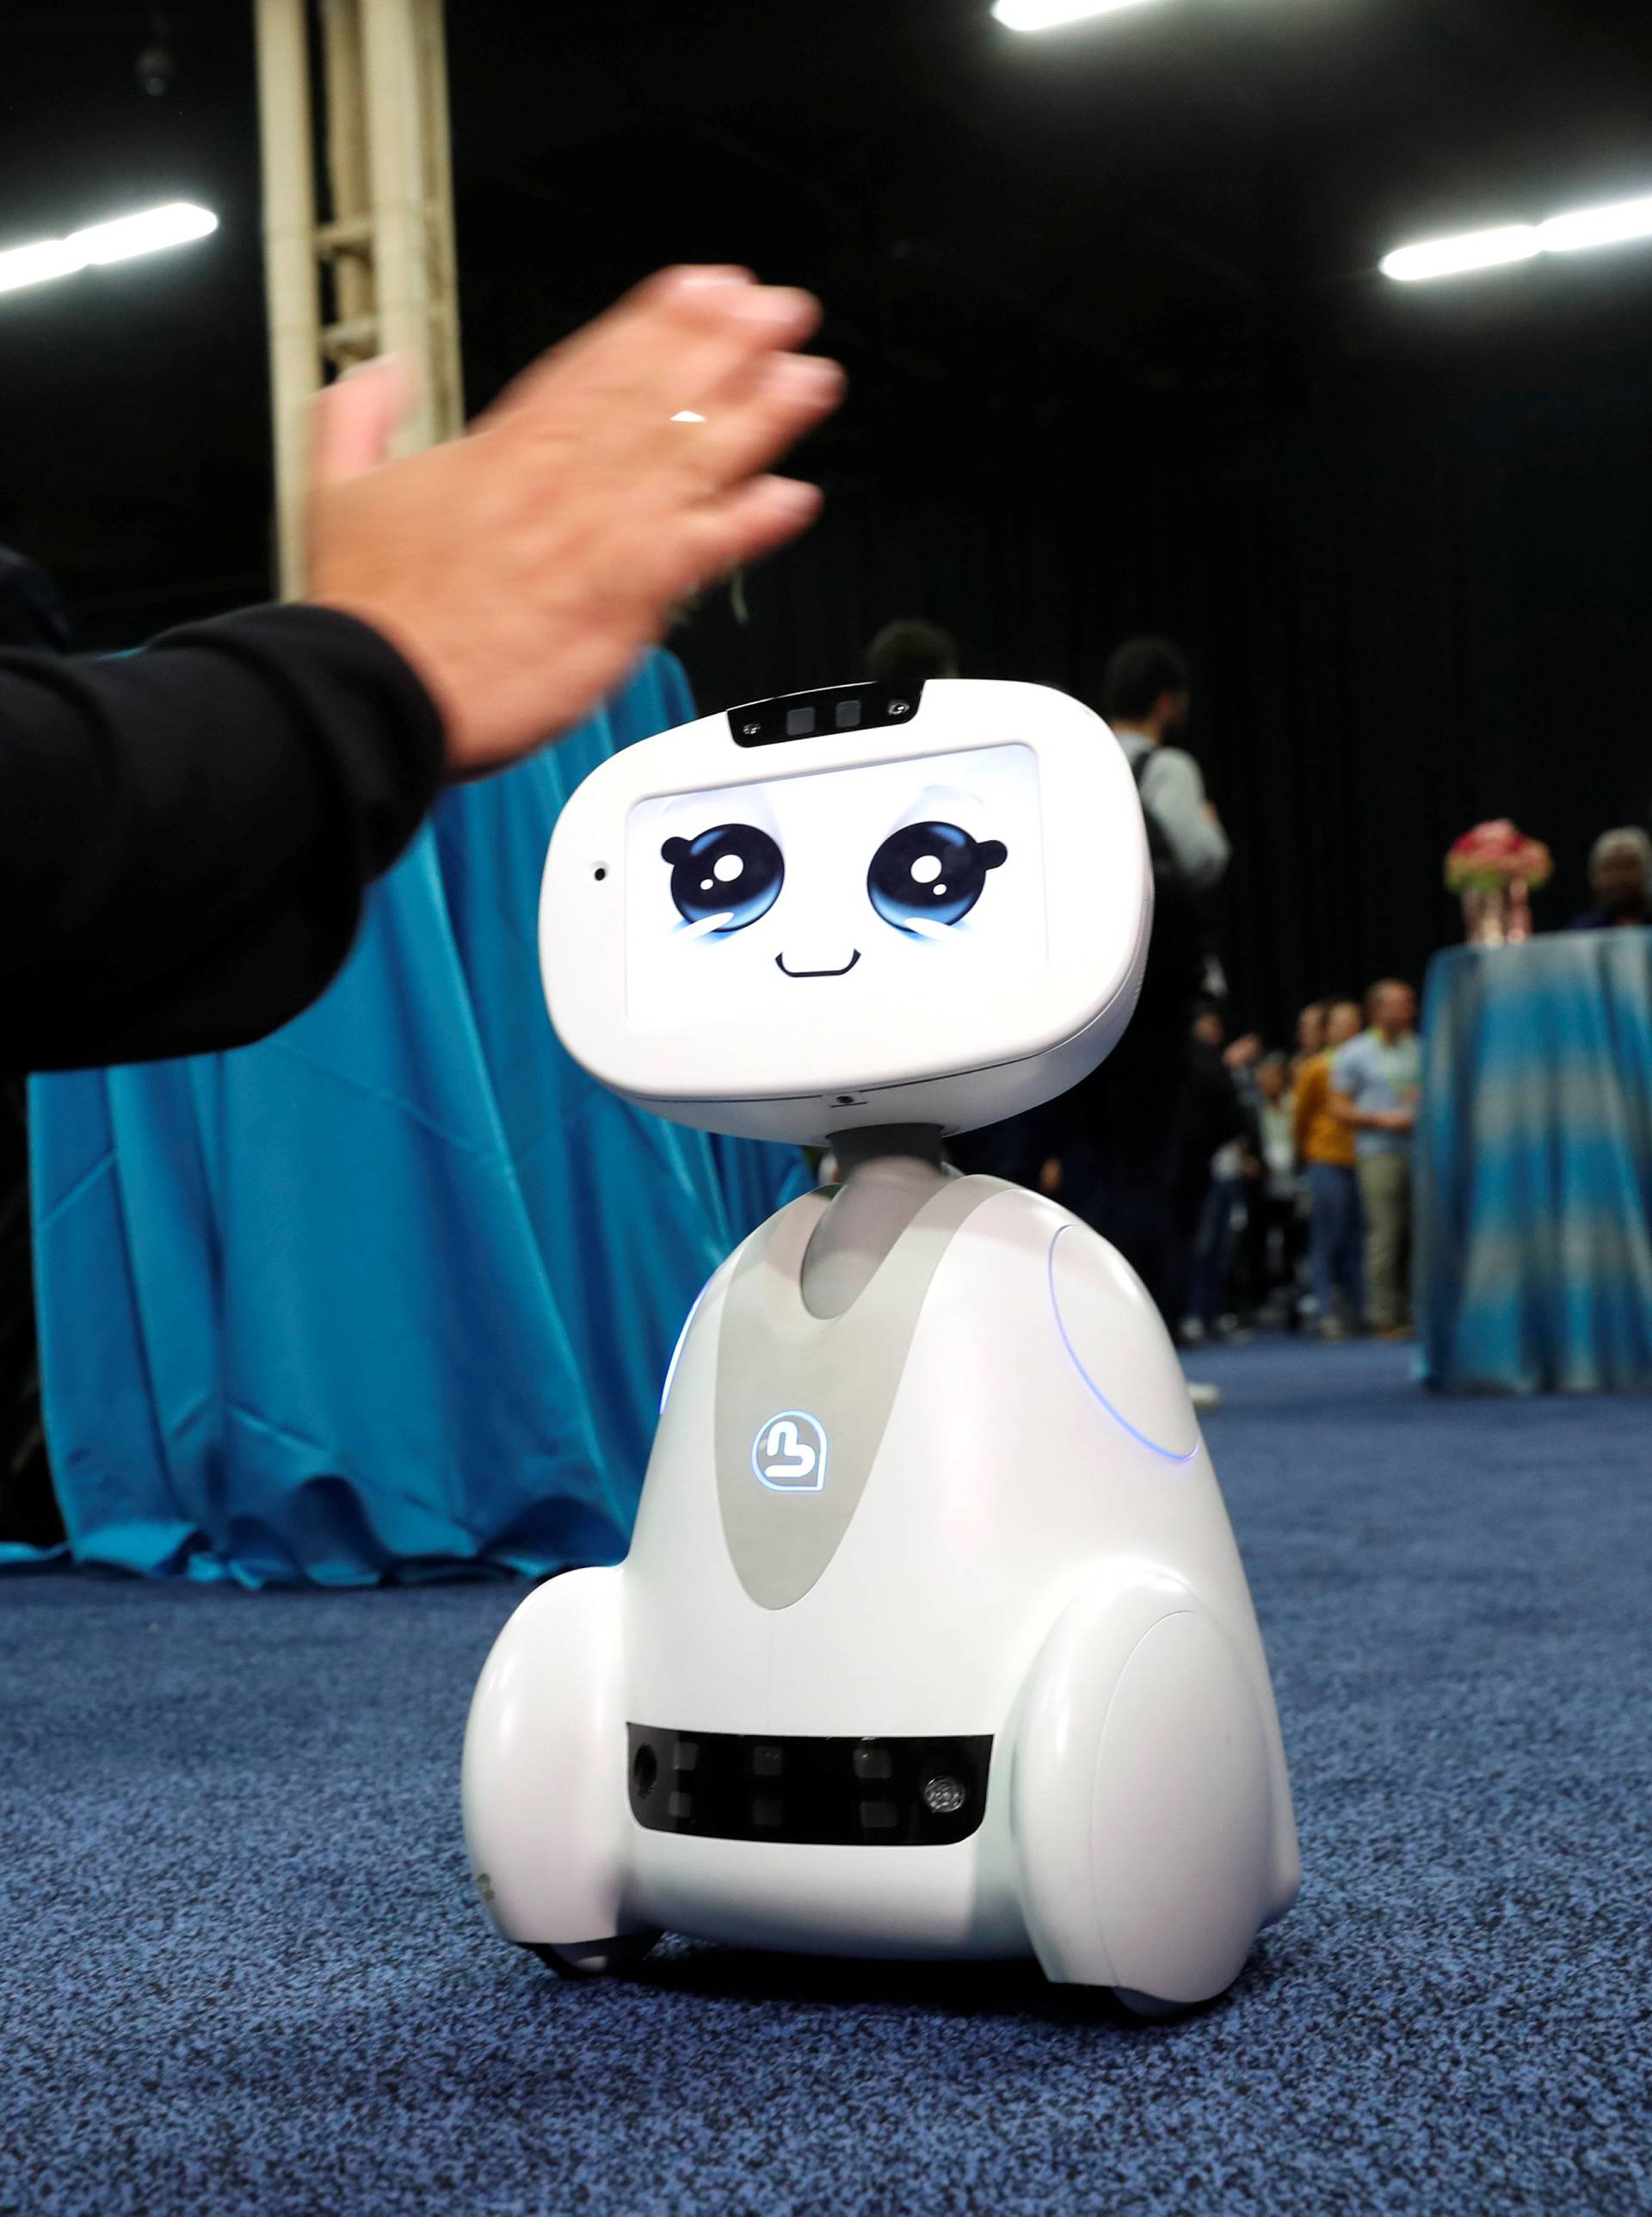 Buddy, an entertainment and assistant robot by Blue Frog Robotics, interacts with a attendee during CES Unveiled at the 2018 CES in Las Vegas